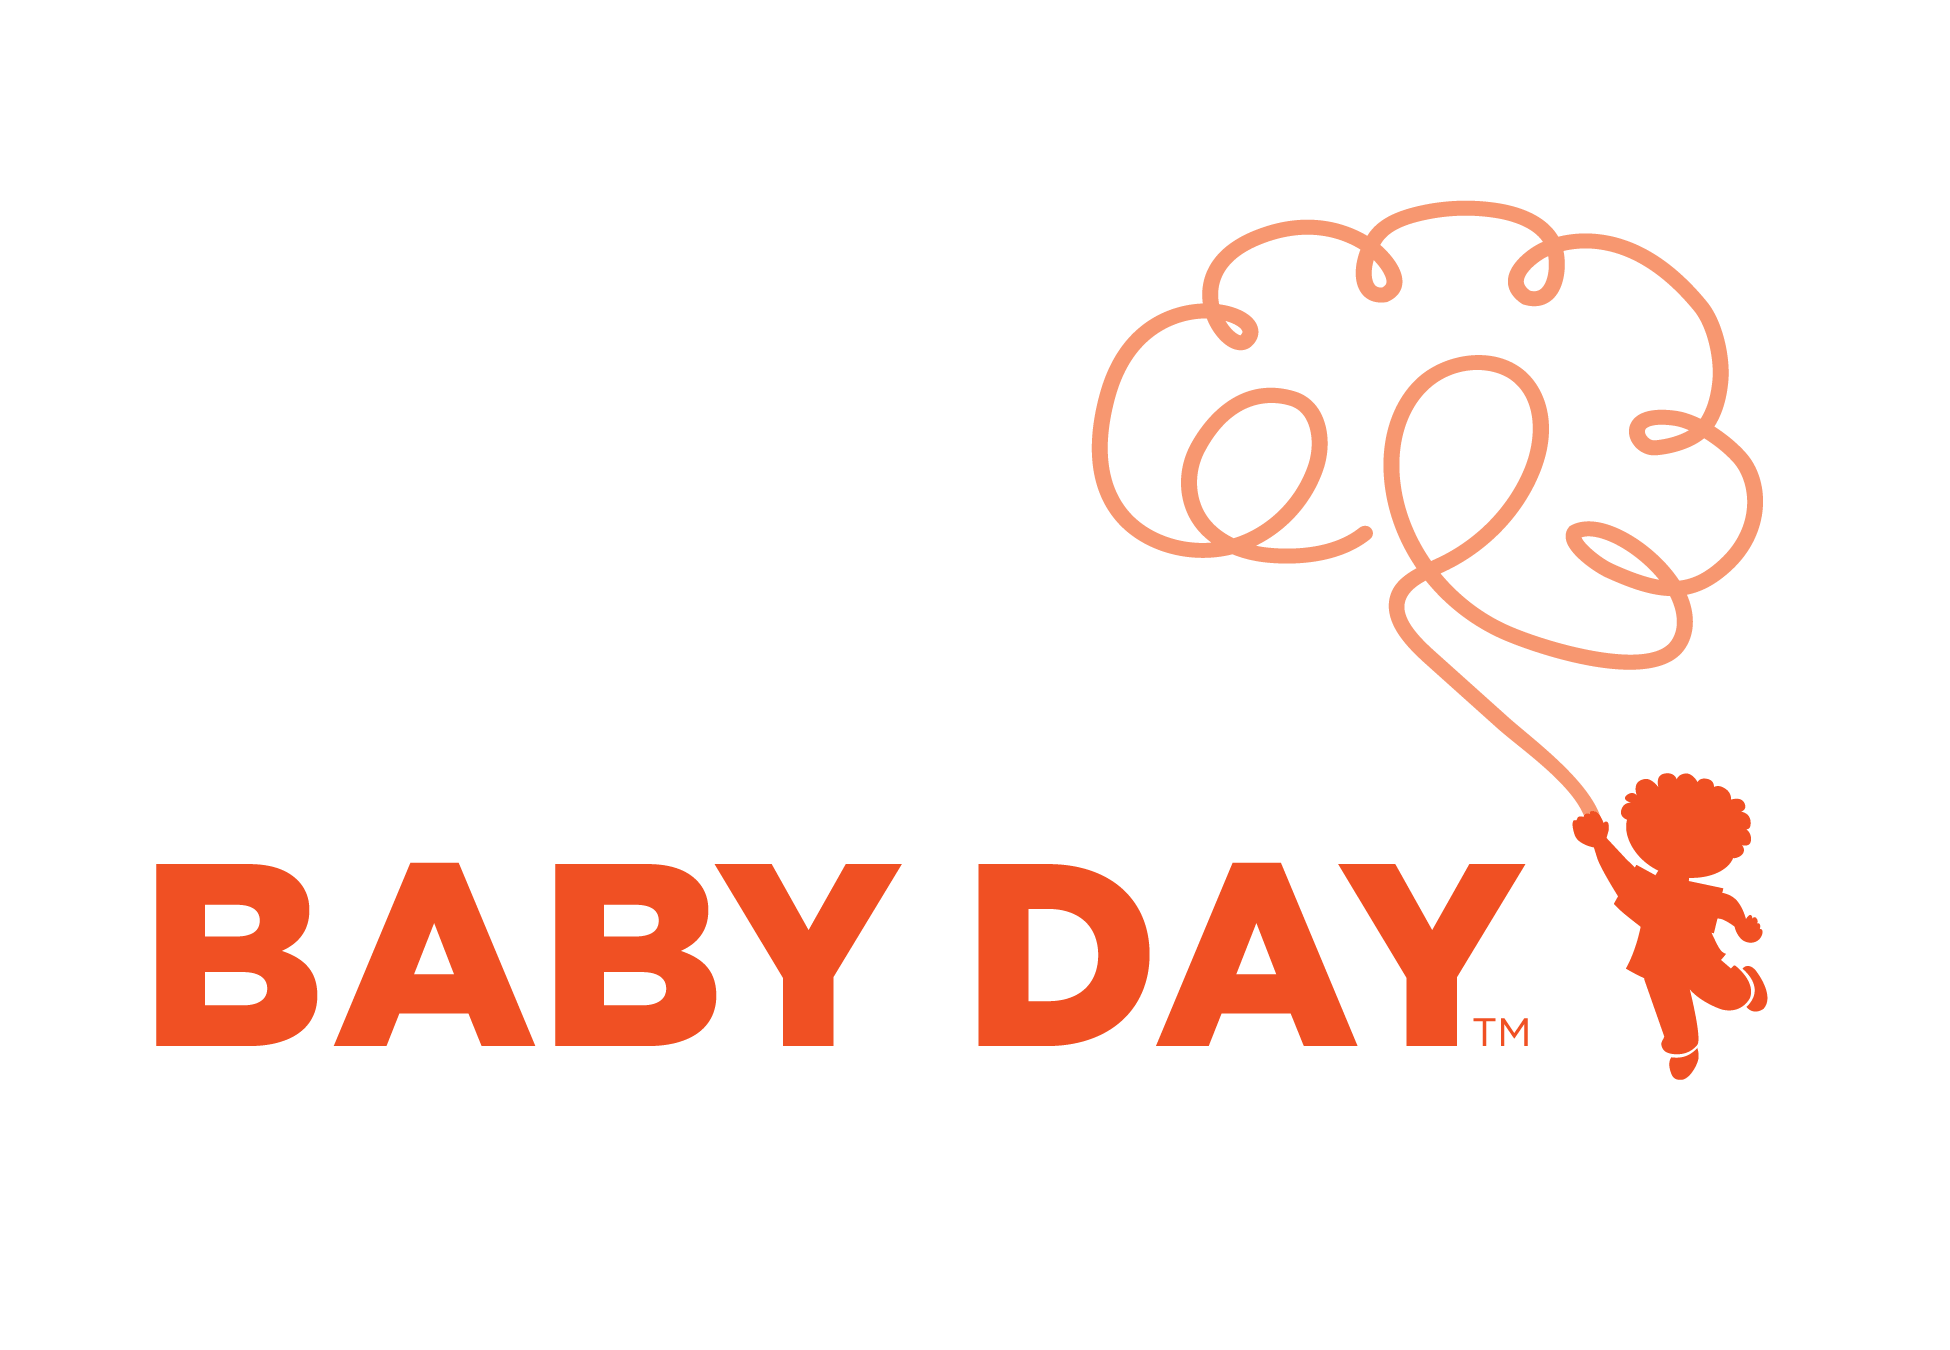 Baby Day Houston Presented by First3Years